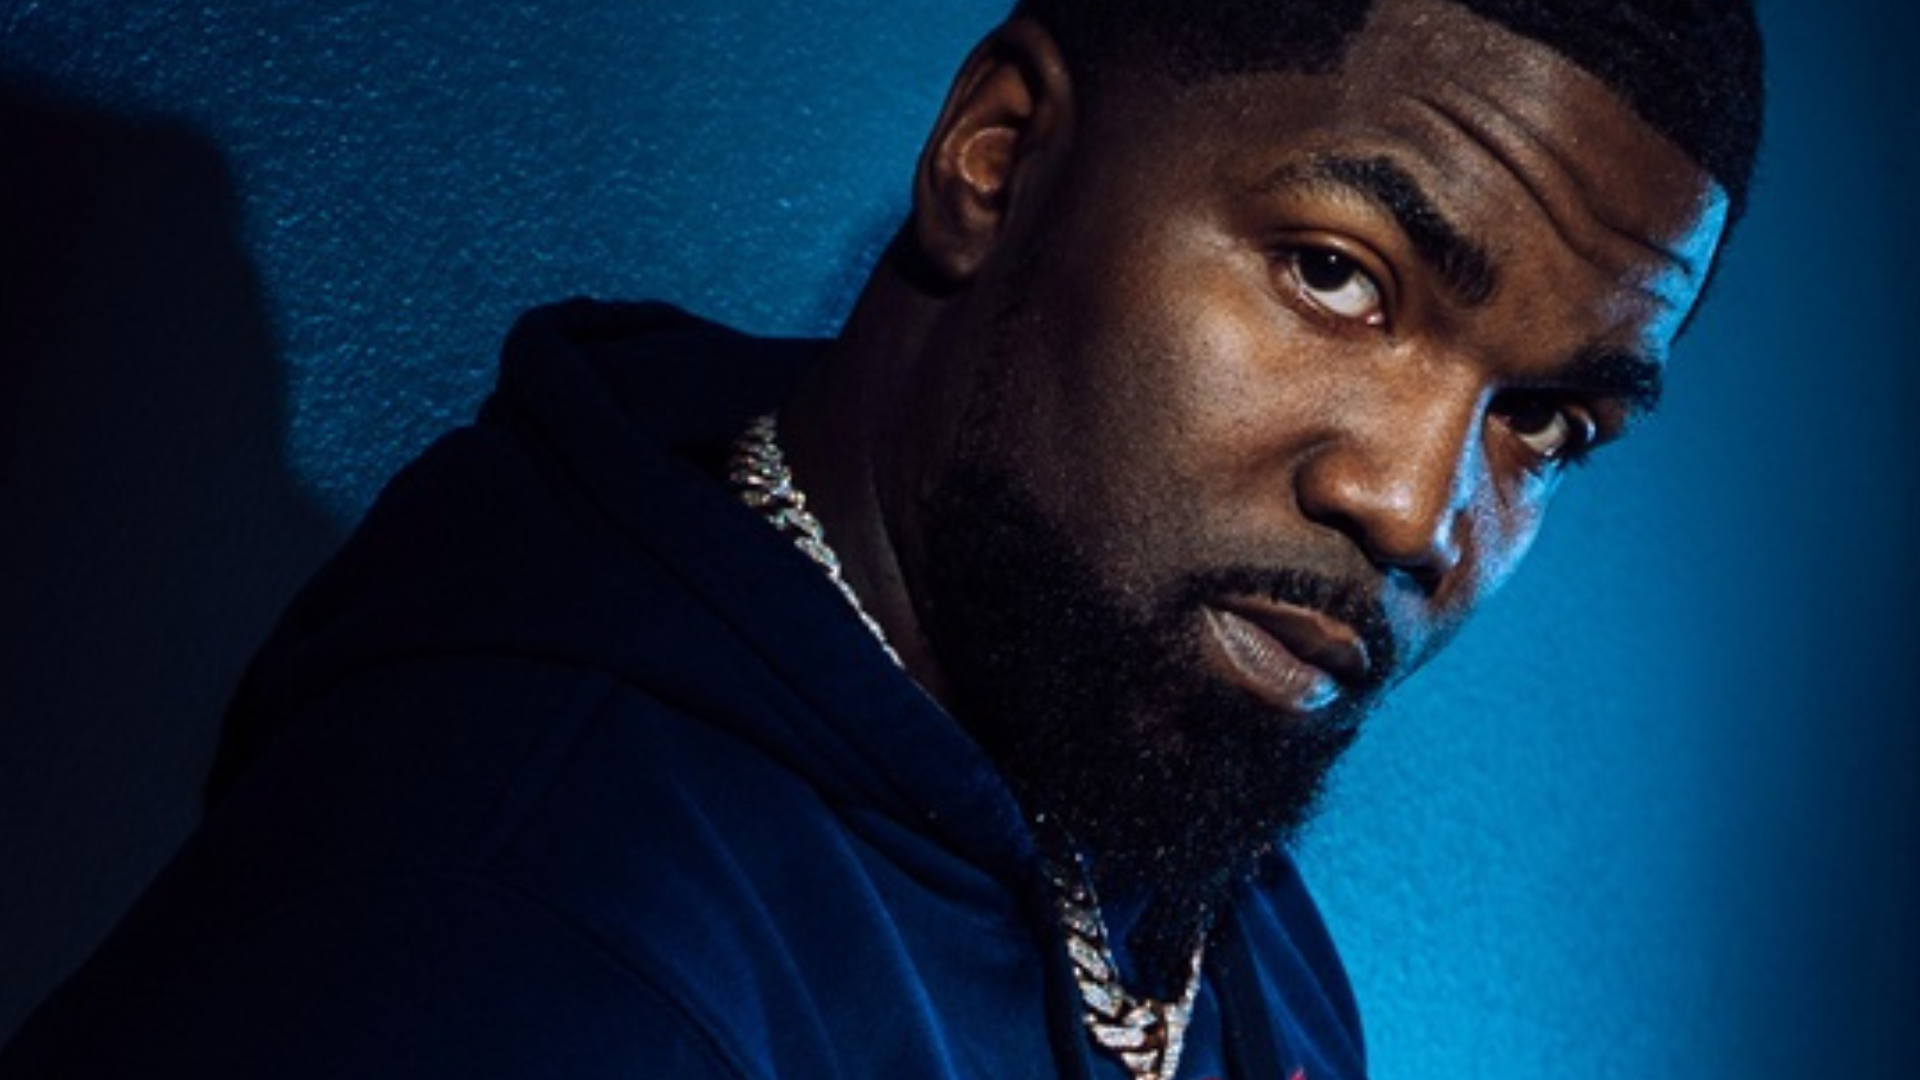 Tsu Surf Indicted on Federal Racketeering Charges & Firearms Possession